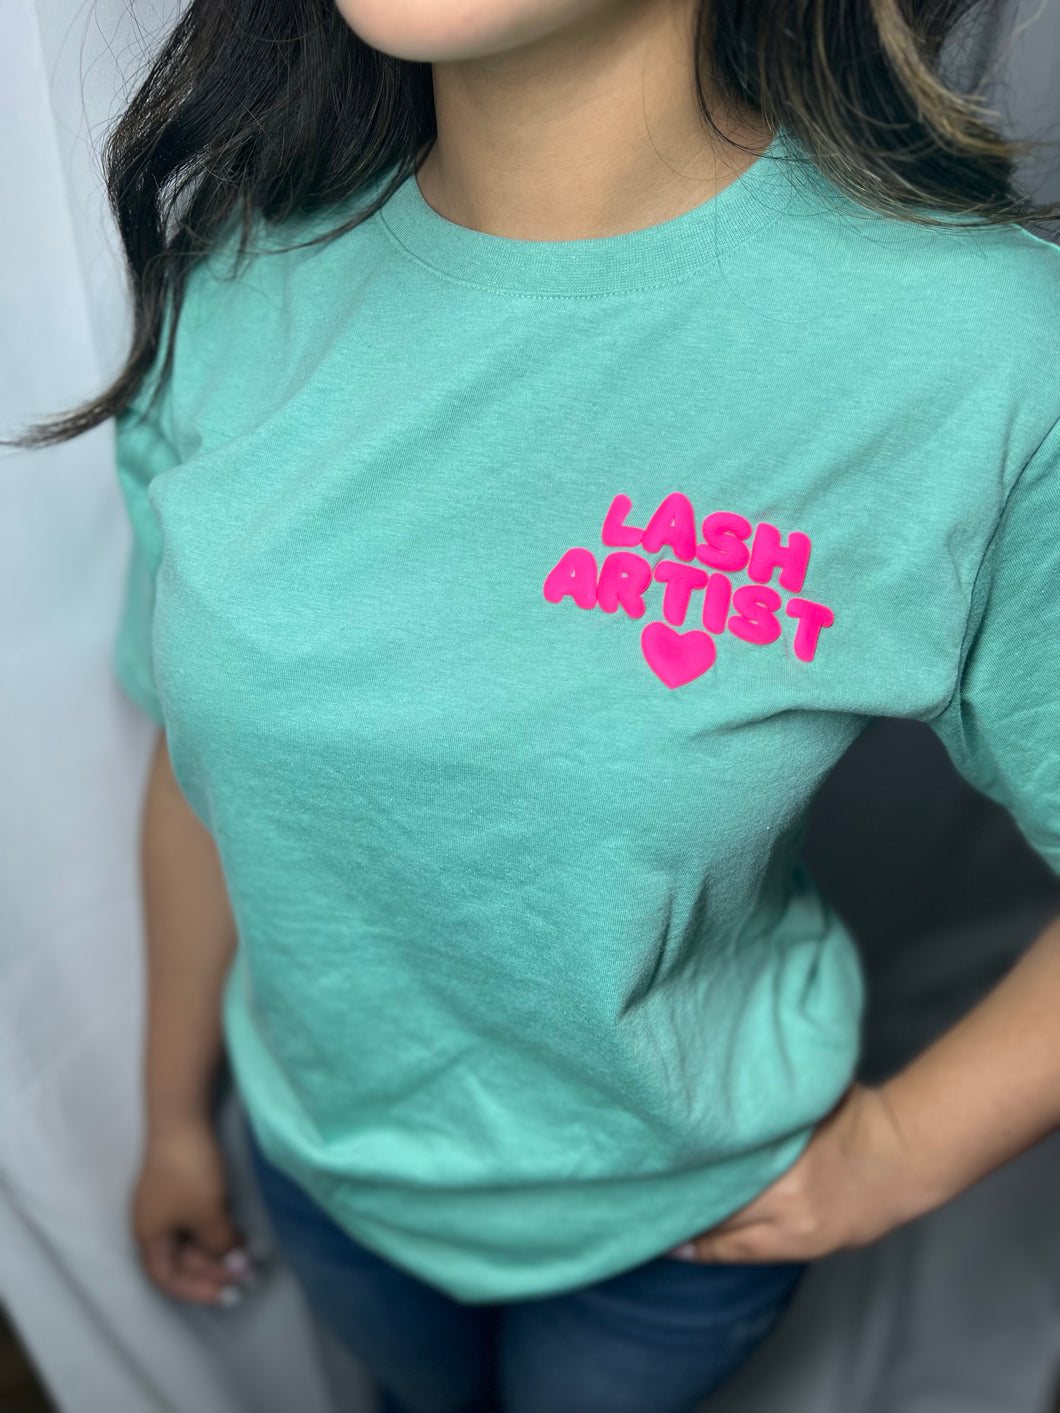 Lash Artist Mint/Teal T-Shirt (Hot pink puff out letters)